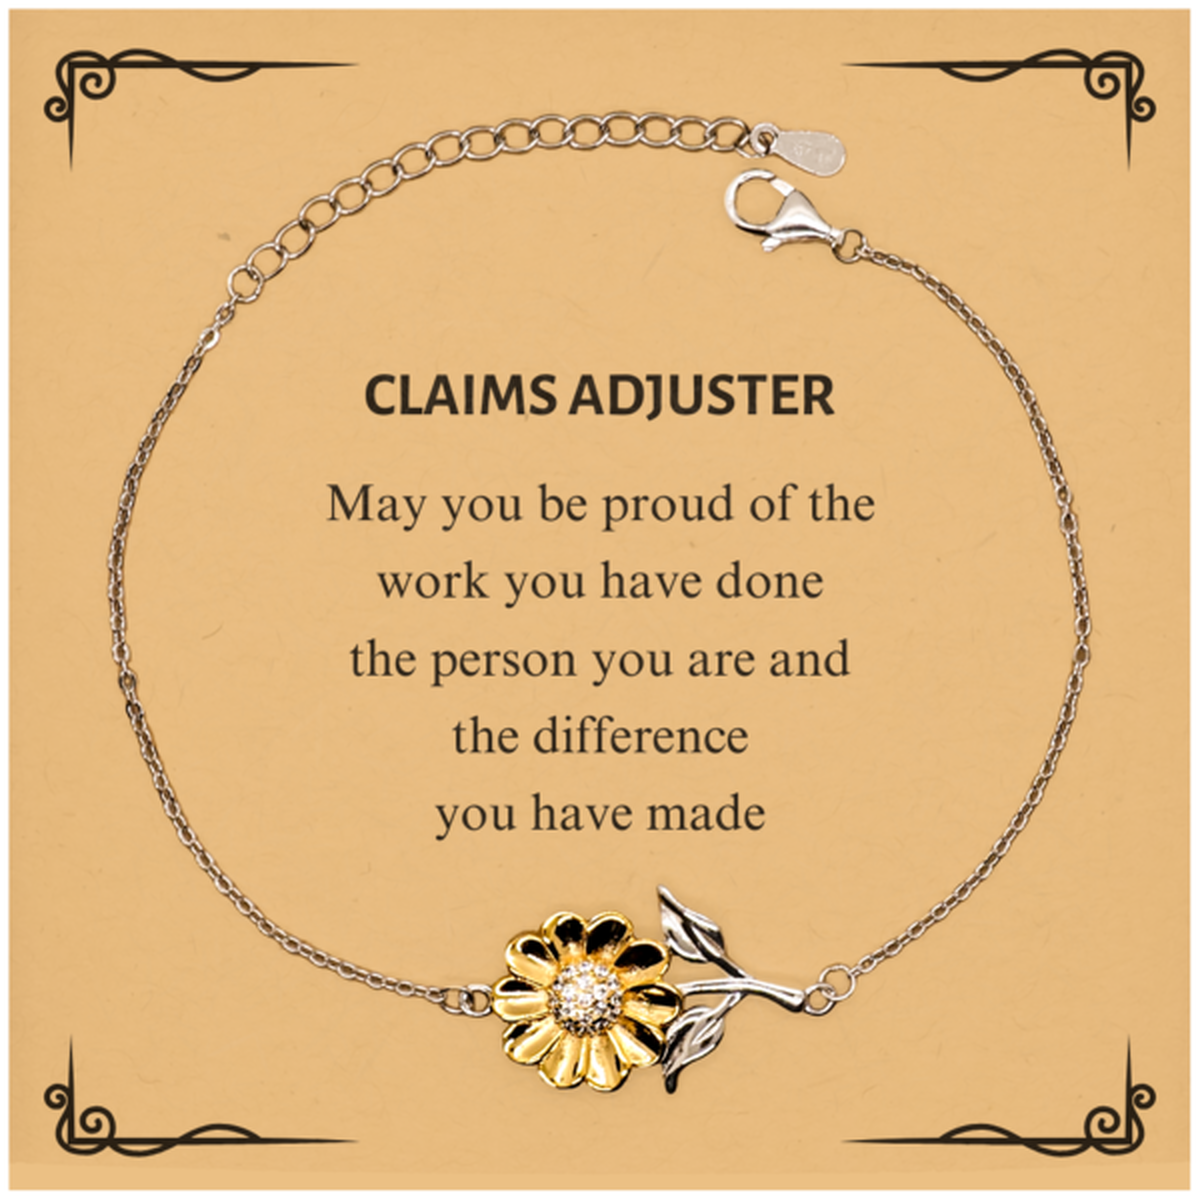 Claims Adjuster May you be proud of the work you have done, Retirement Claims Adjuster Sunflower Bracelet for Colleague Appreciation Gifts Amazing for Claims Adjuster